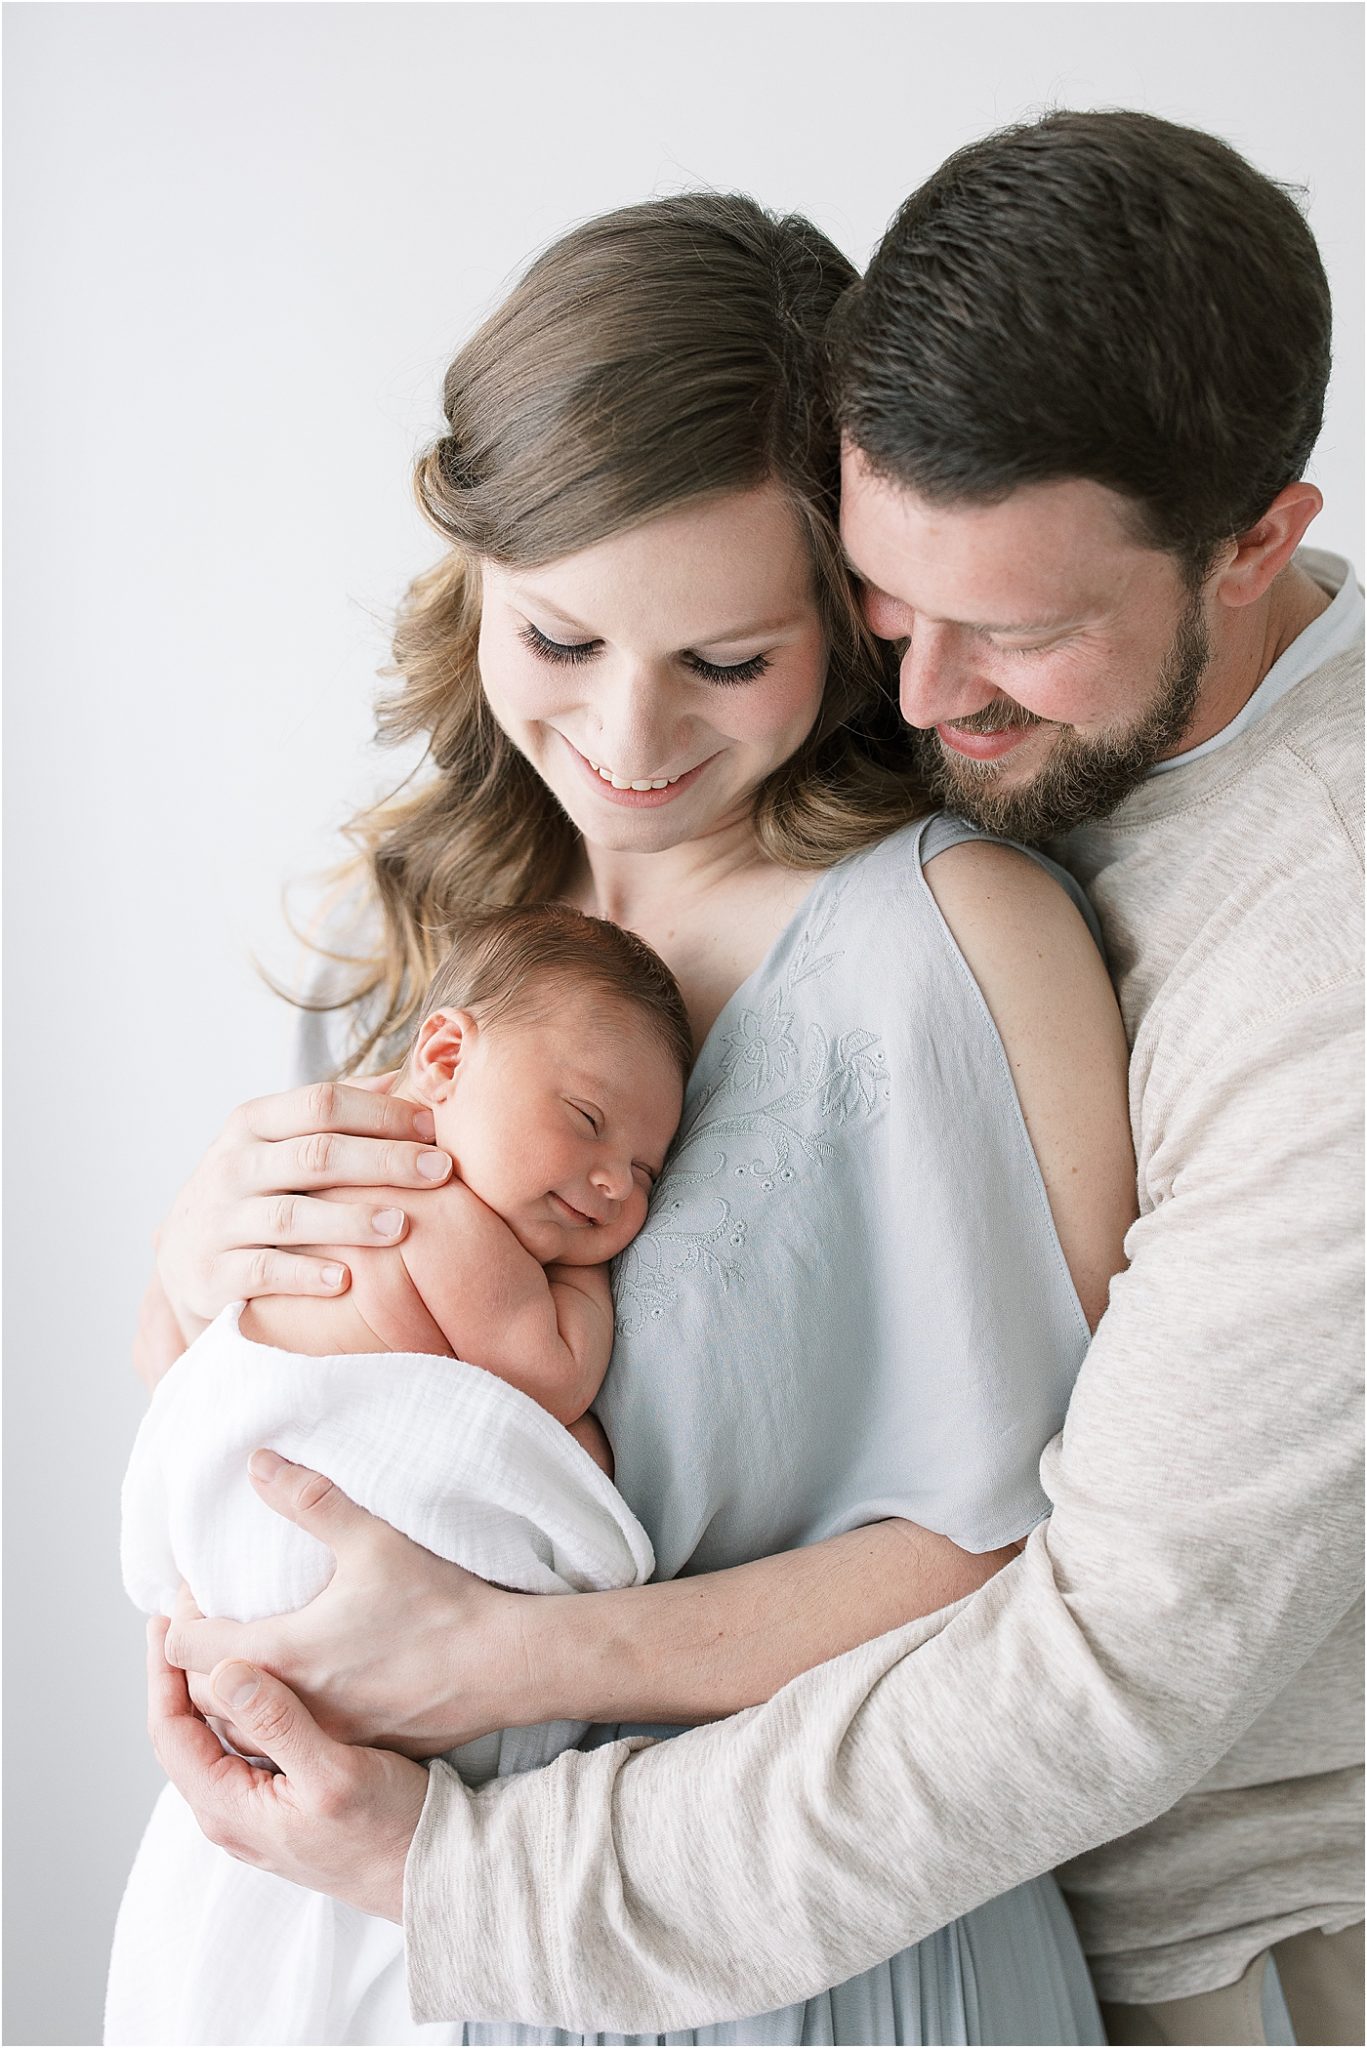 Mom and Dad snuggling their new baby boy.Photo by Lindsay Konopa Photography.